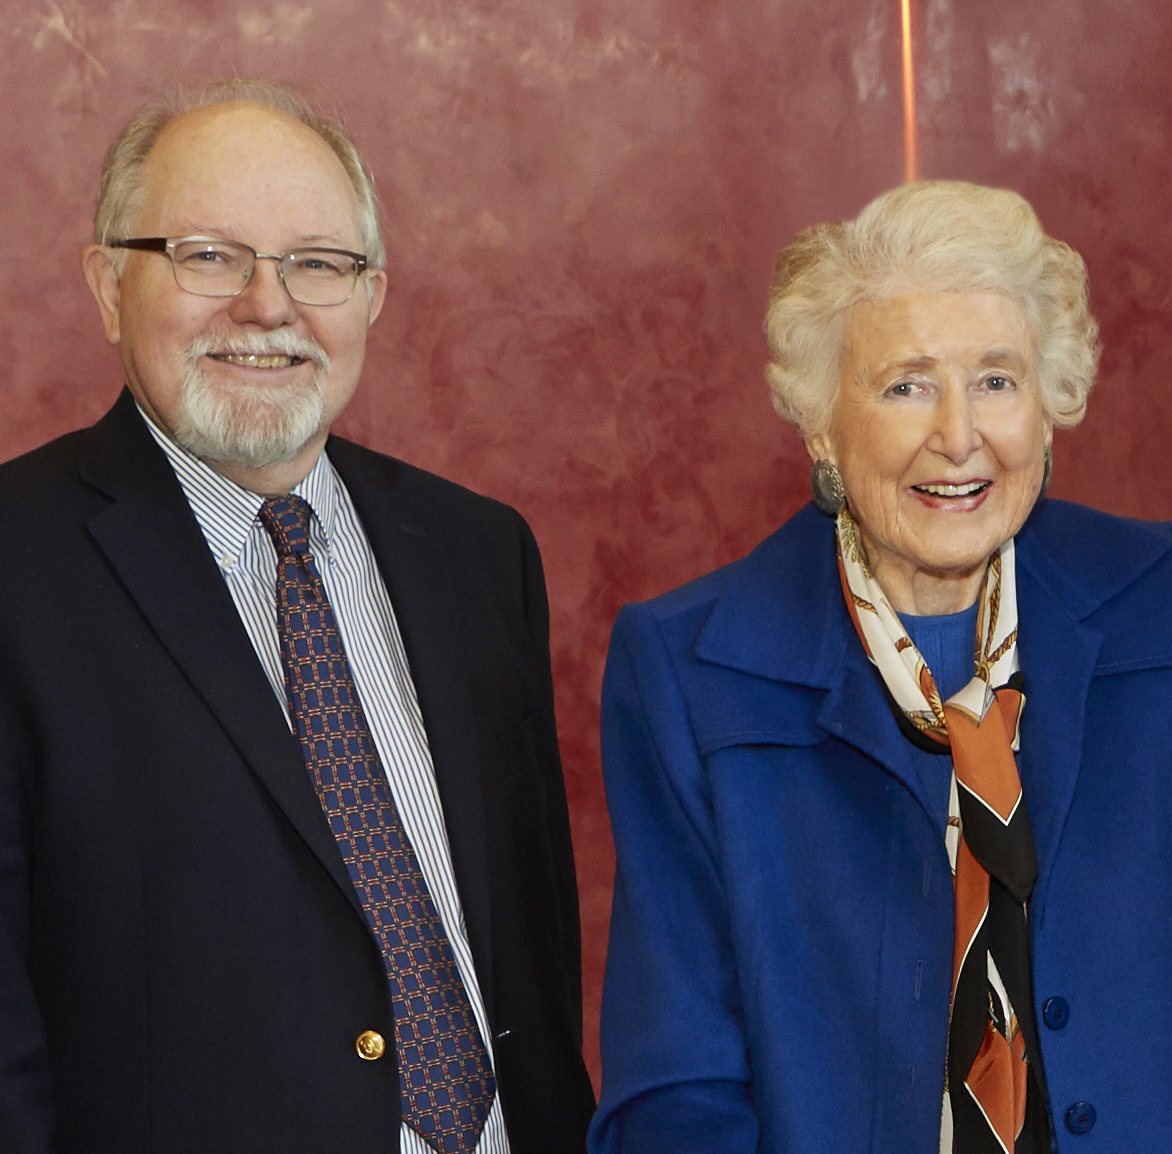 We thank the generous donors who gave gifts in memory of Rick Brettell and Edith O’Donnell